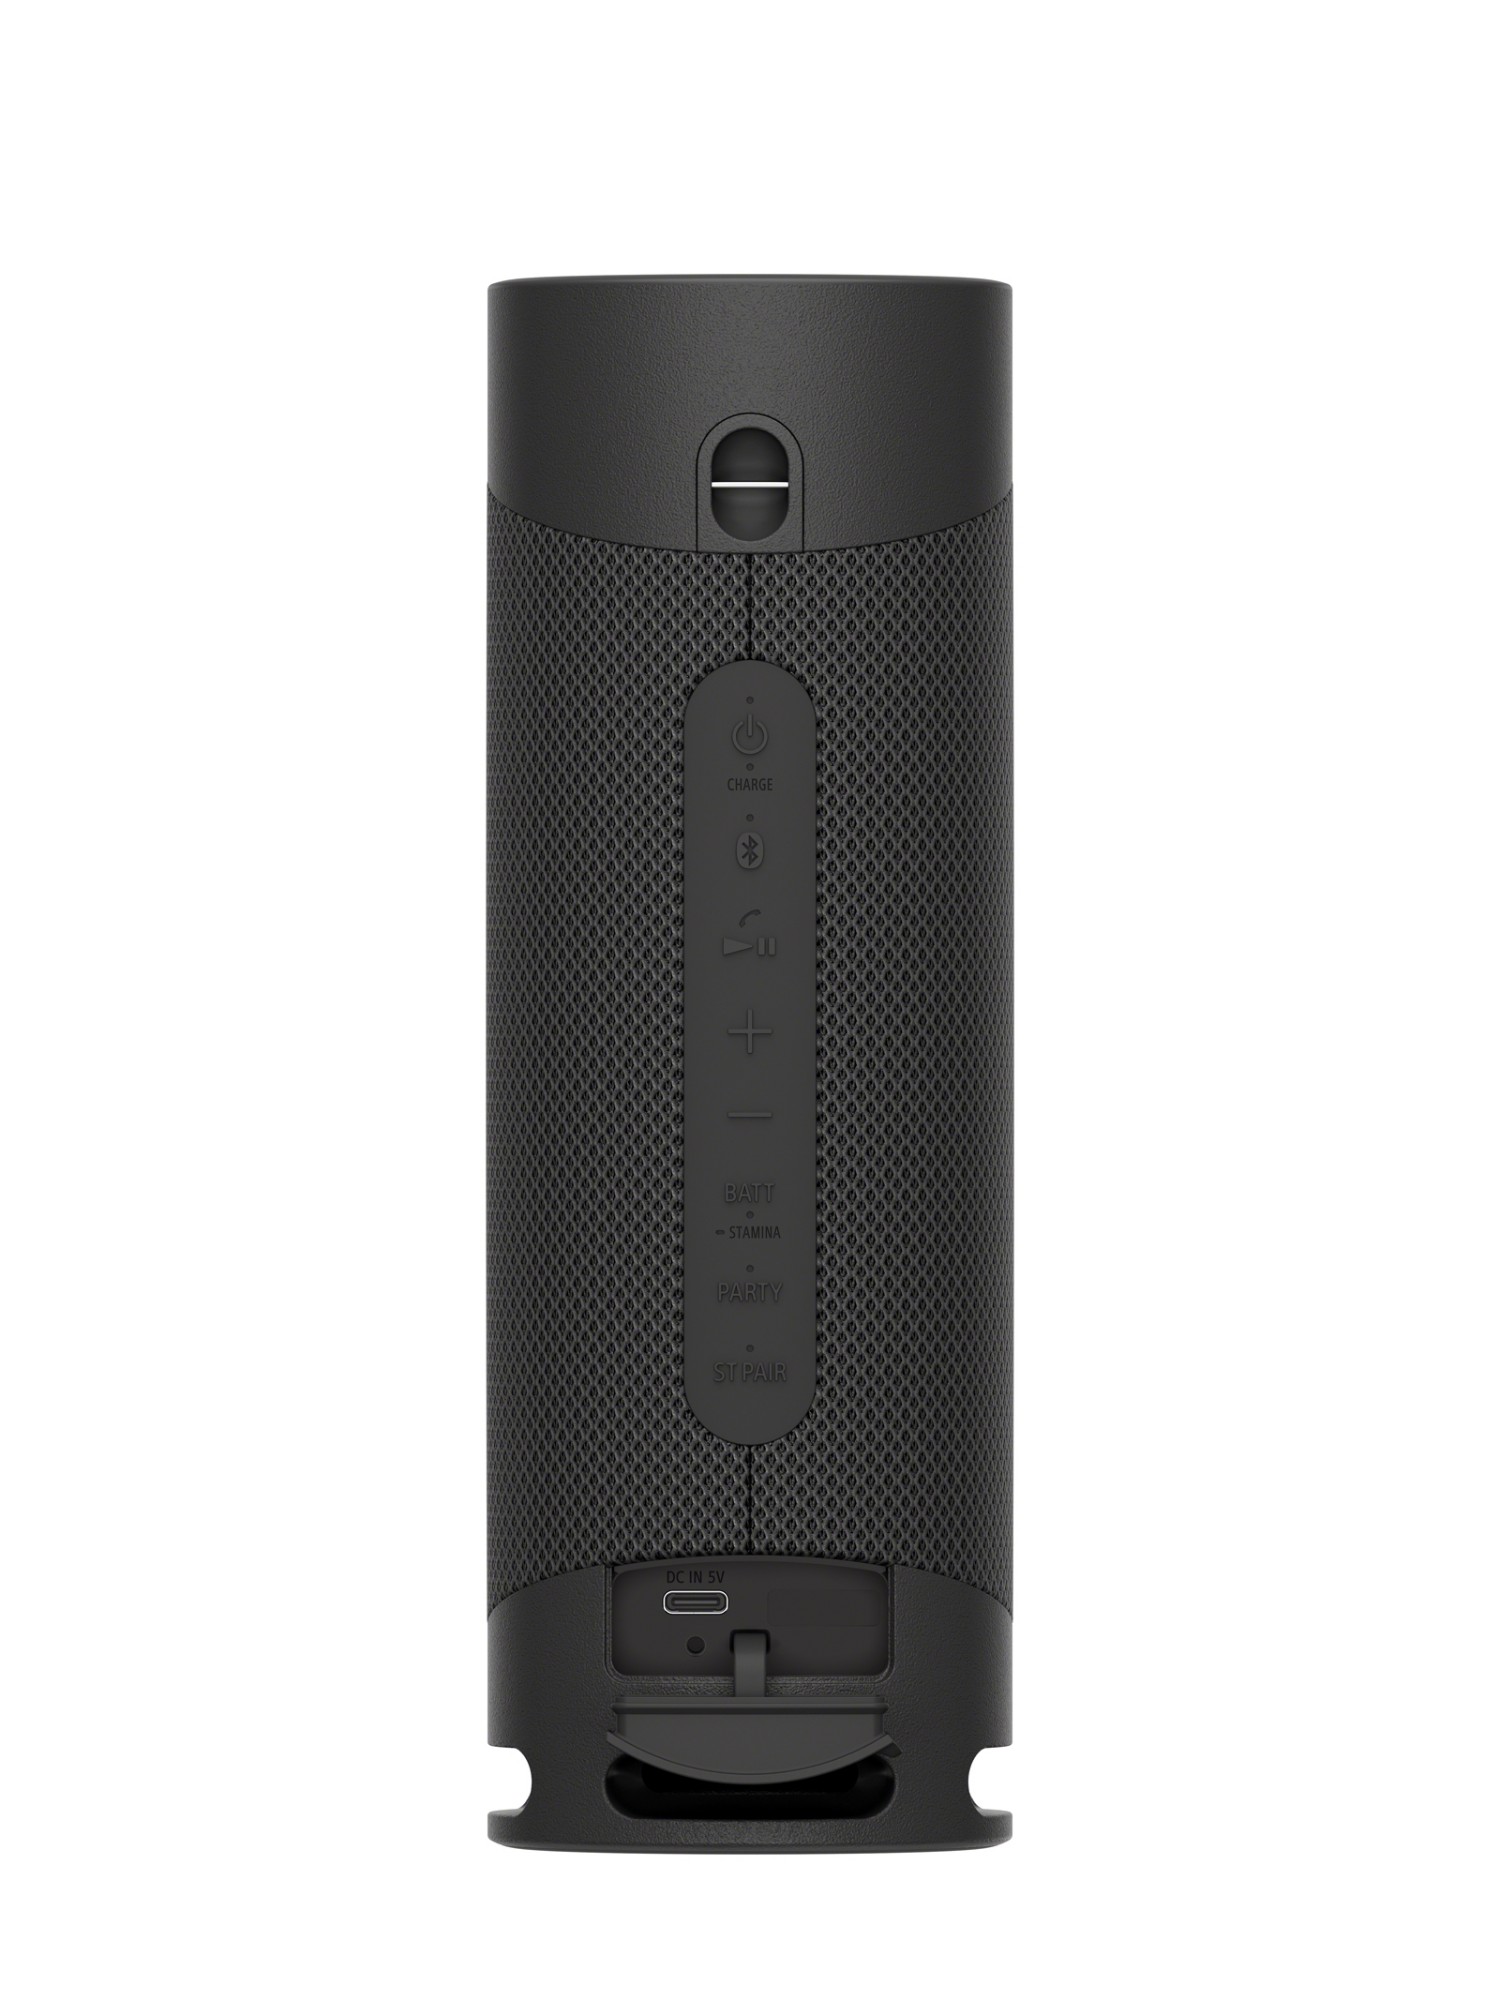 Sony SRS-XB23 - Super-portable, powerful and durable Bluetooth© speaker with EXTRA BASS